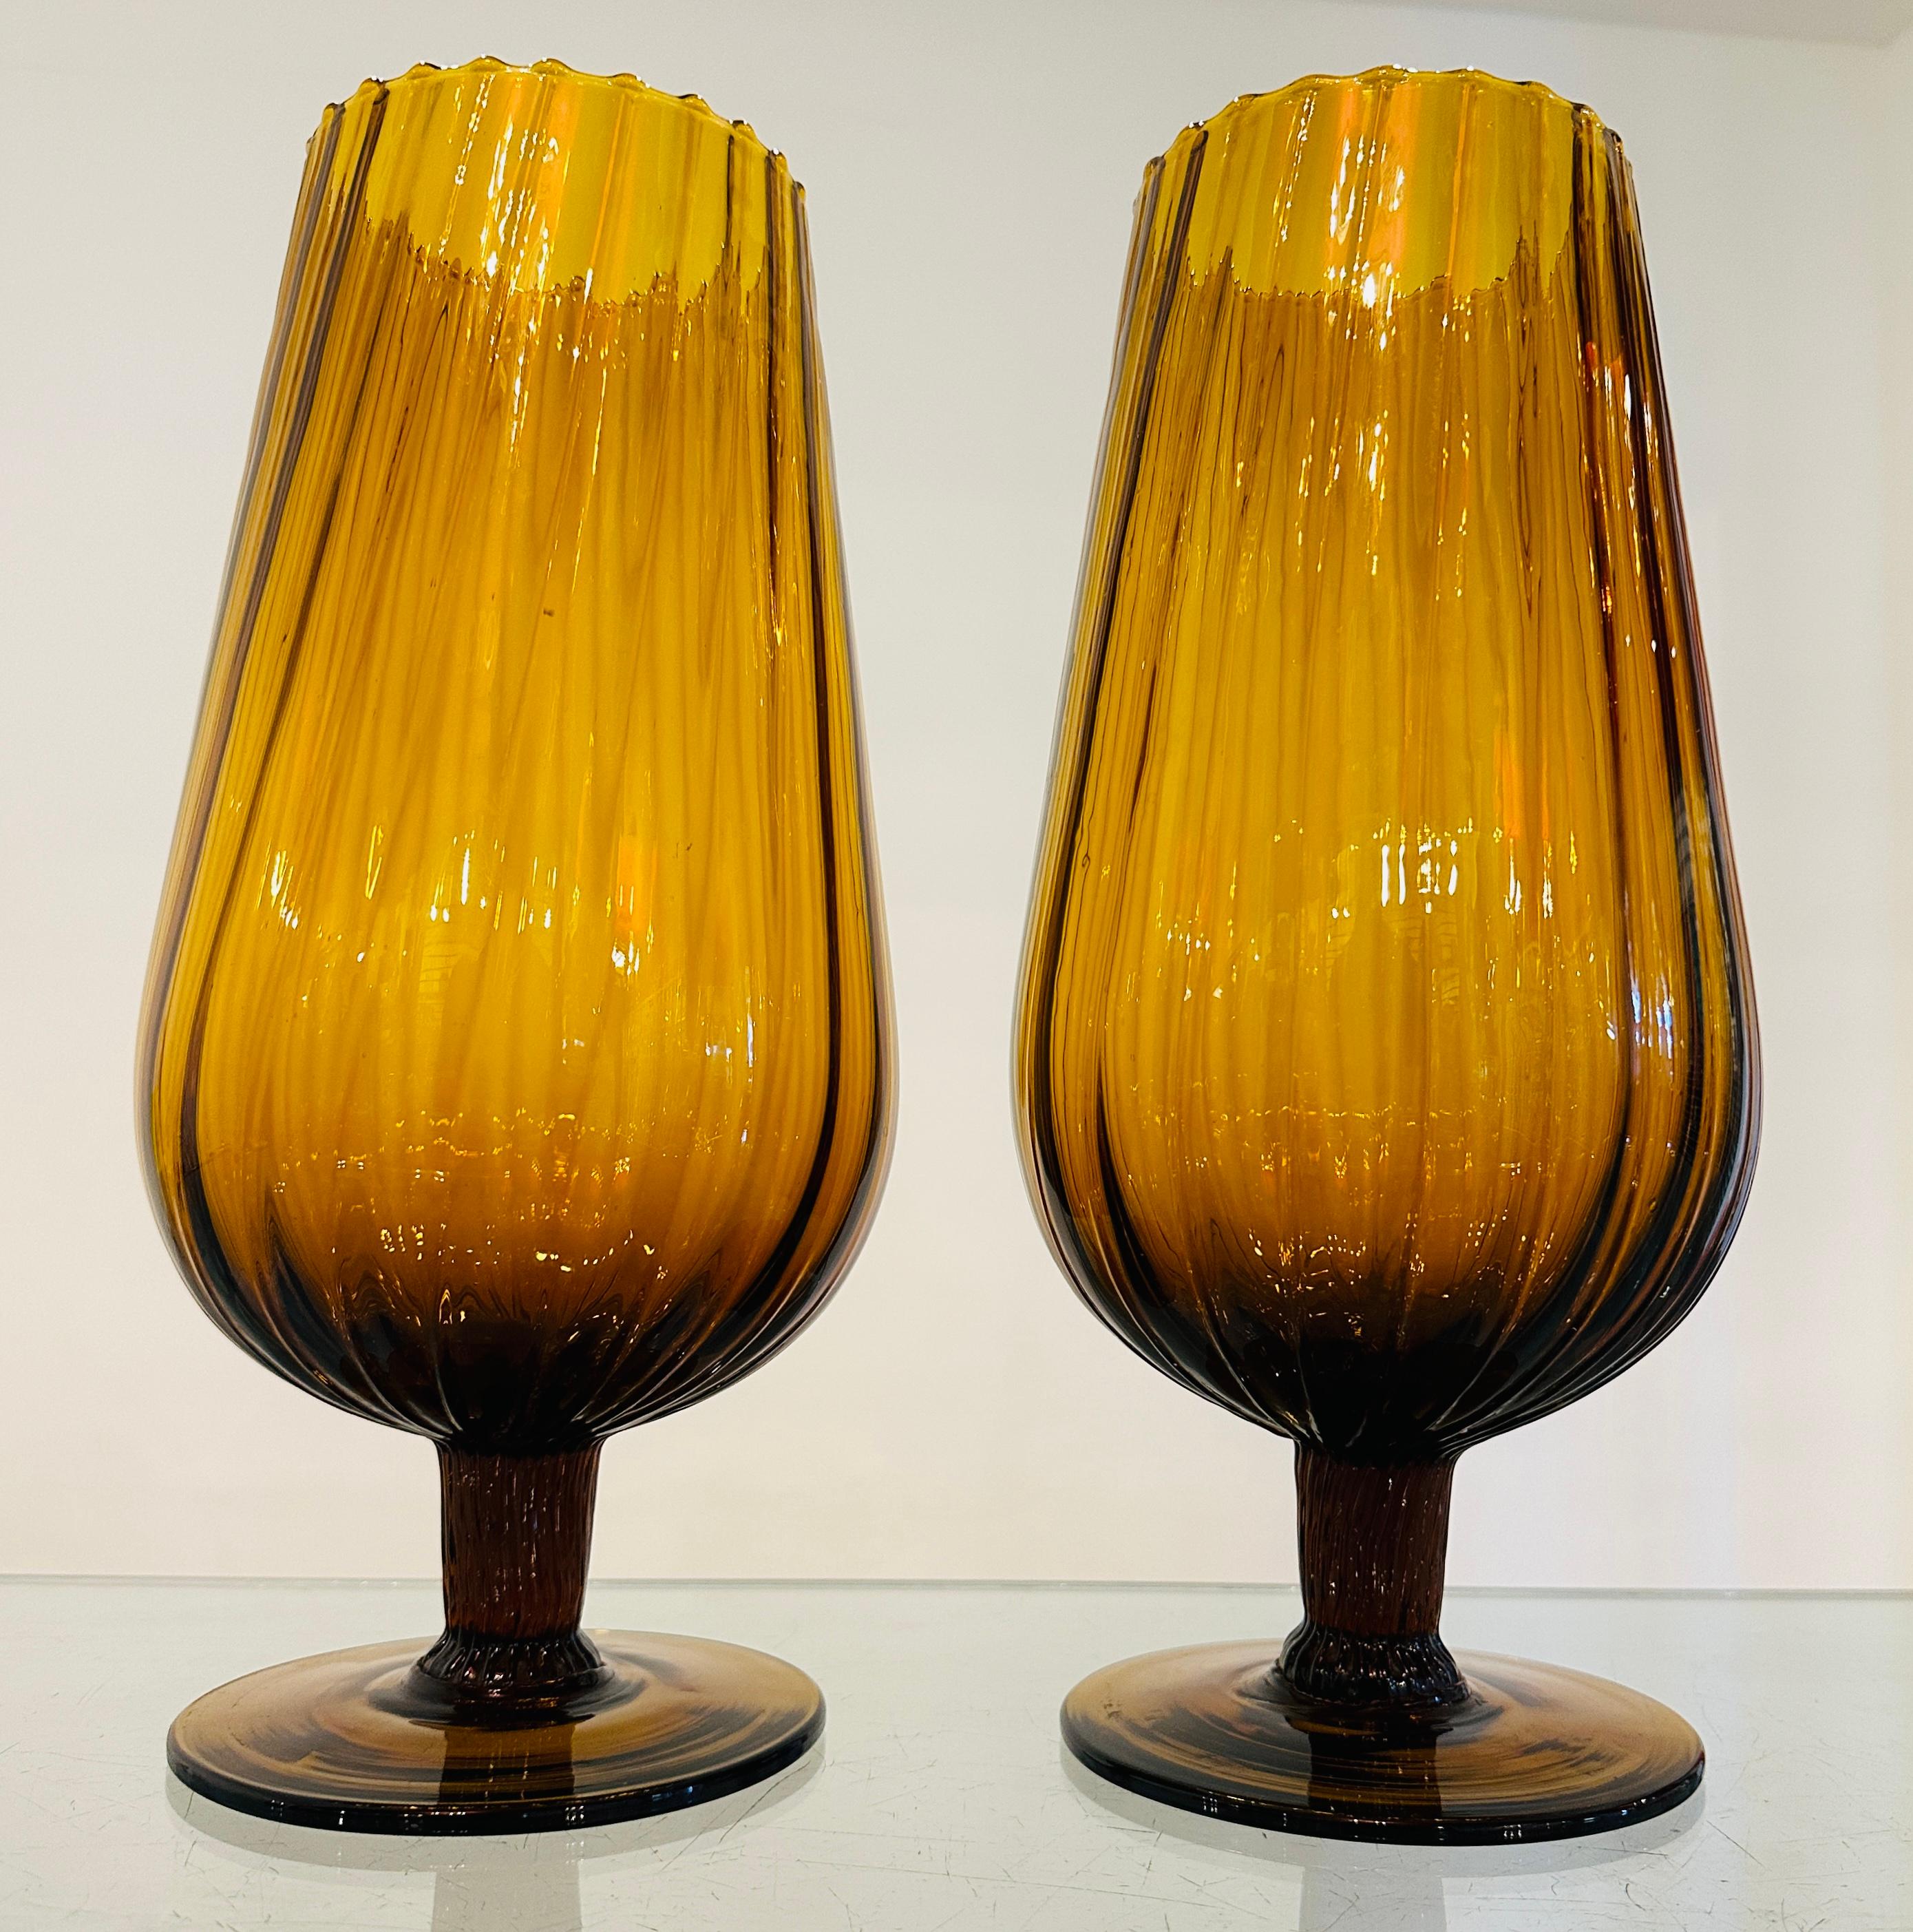 Pair of large vintage 1960s amber coloured swirled and ribbed glass goblet-shaped vases with scalloped rims.  The circular bases are made from a thicker glass to help support the vase and are a darker amber colour. The ribs in each stem extend